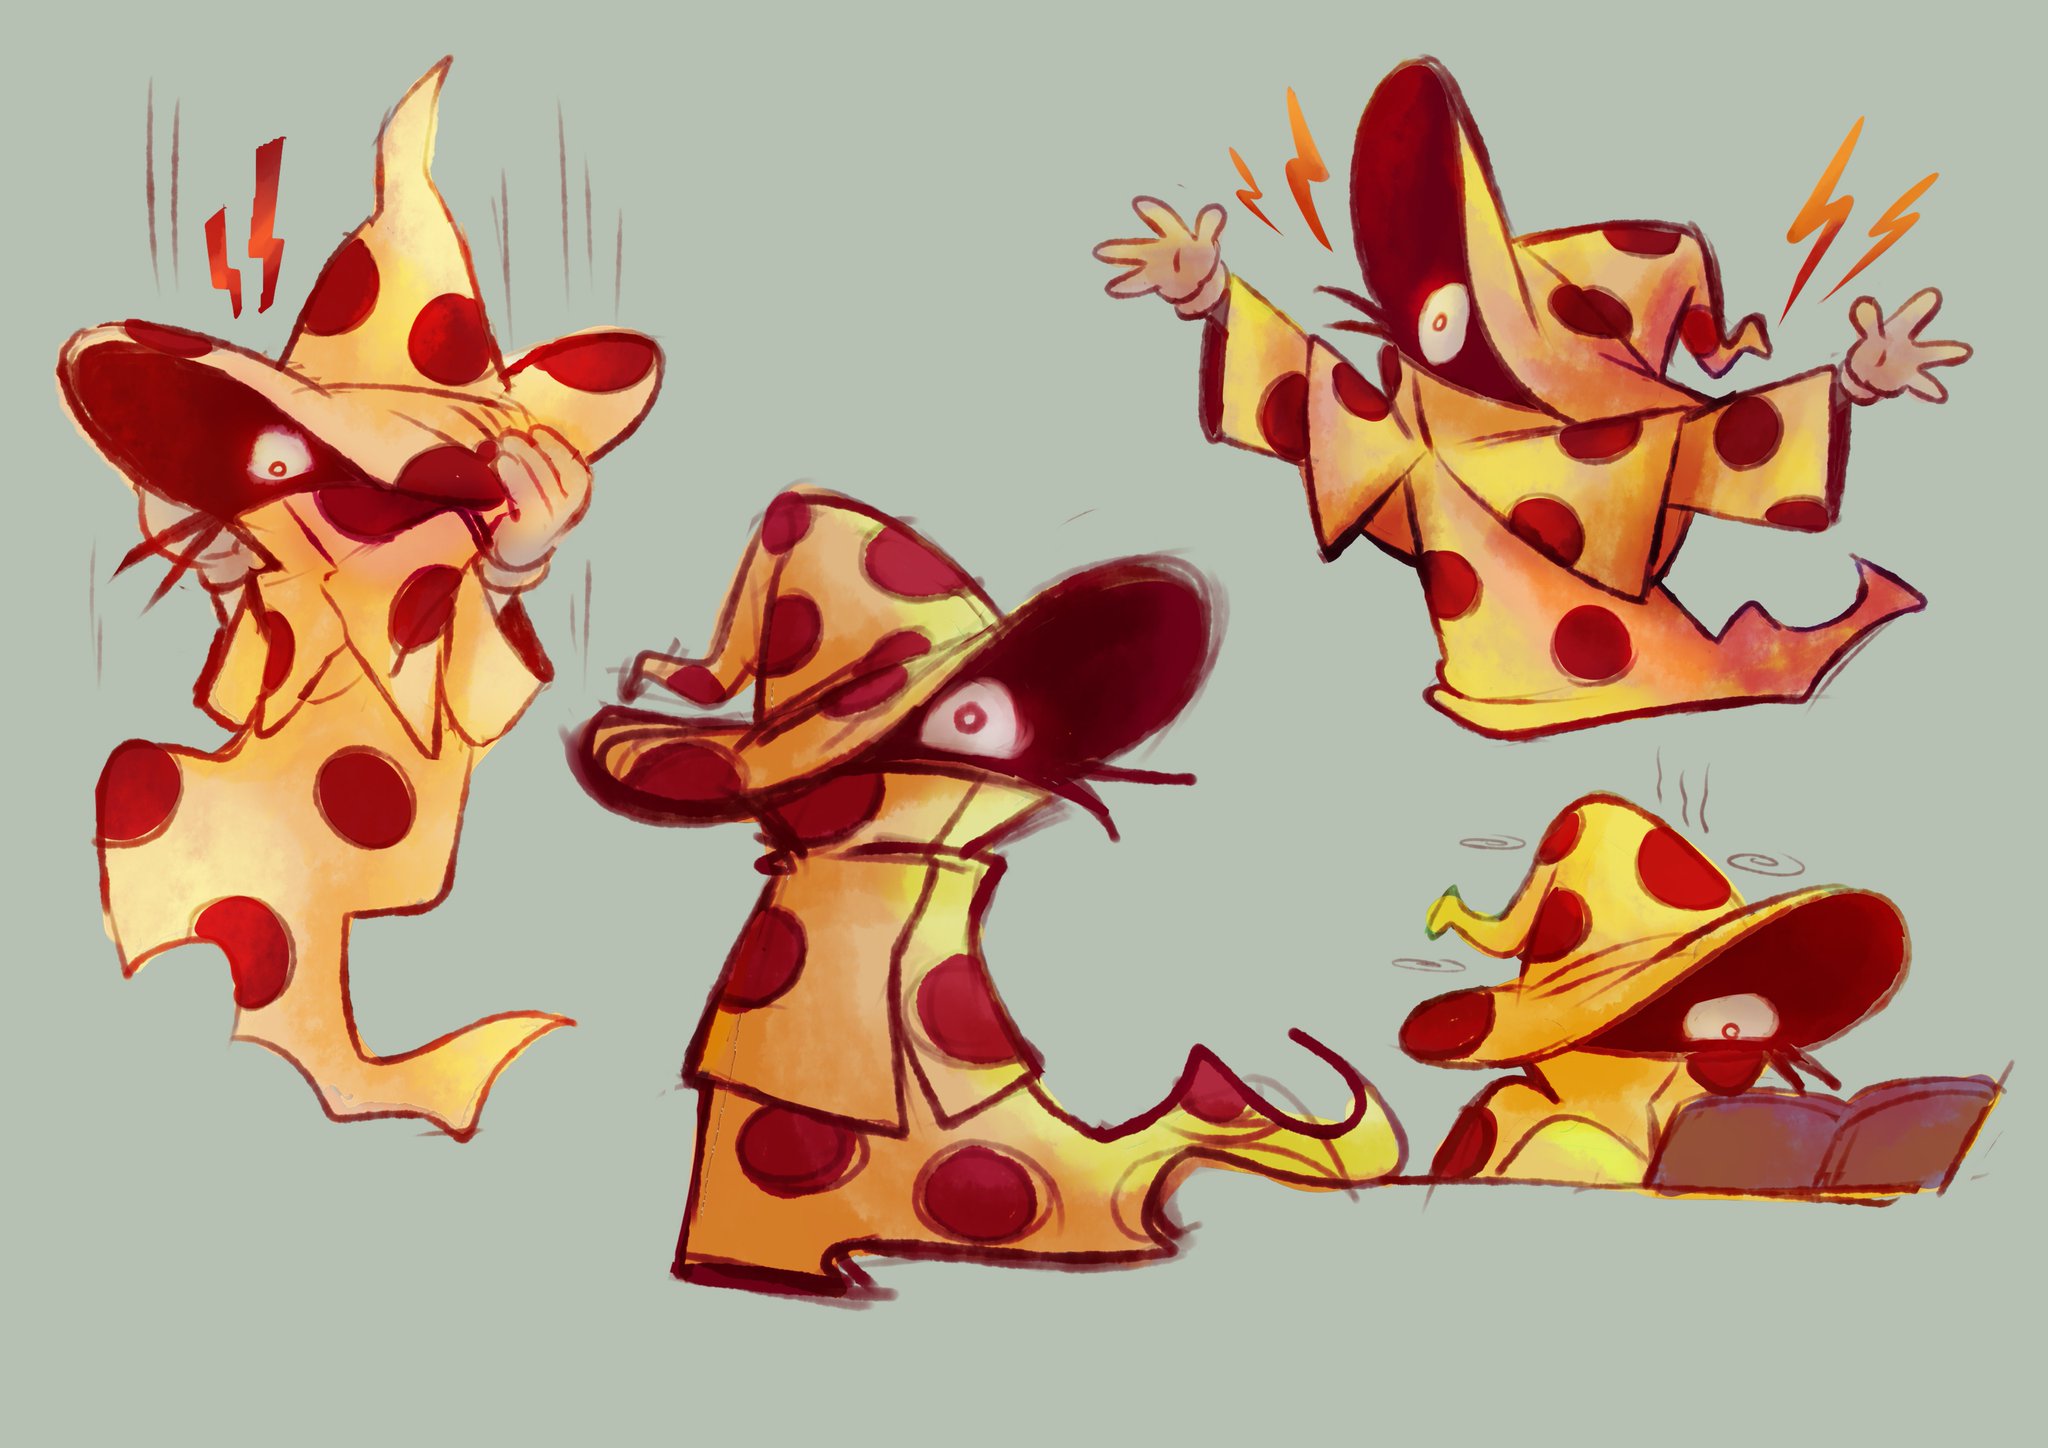 Skarmuse on X: Pizza tower game is kul! This character design is cute by  Minus8 #pizzatower #Pizzatowerfanart  / X